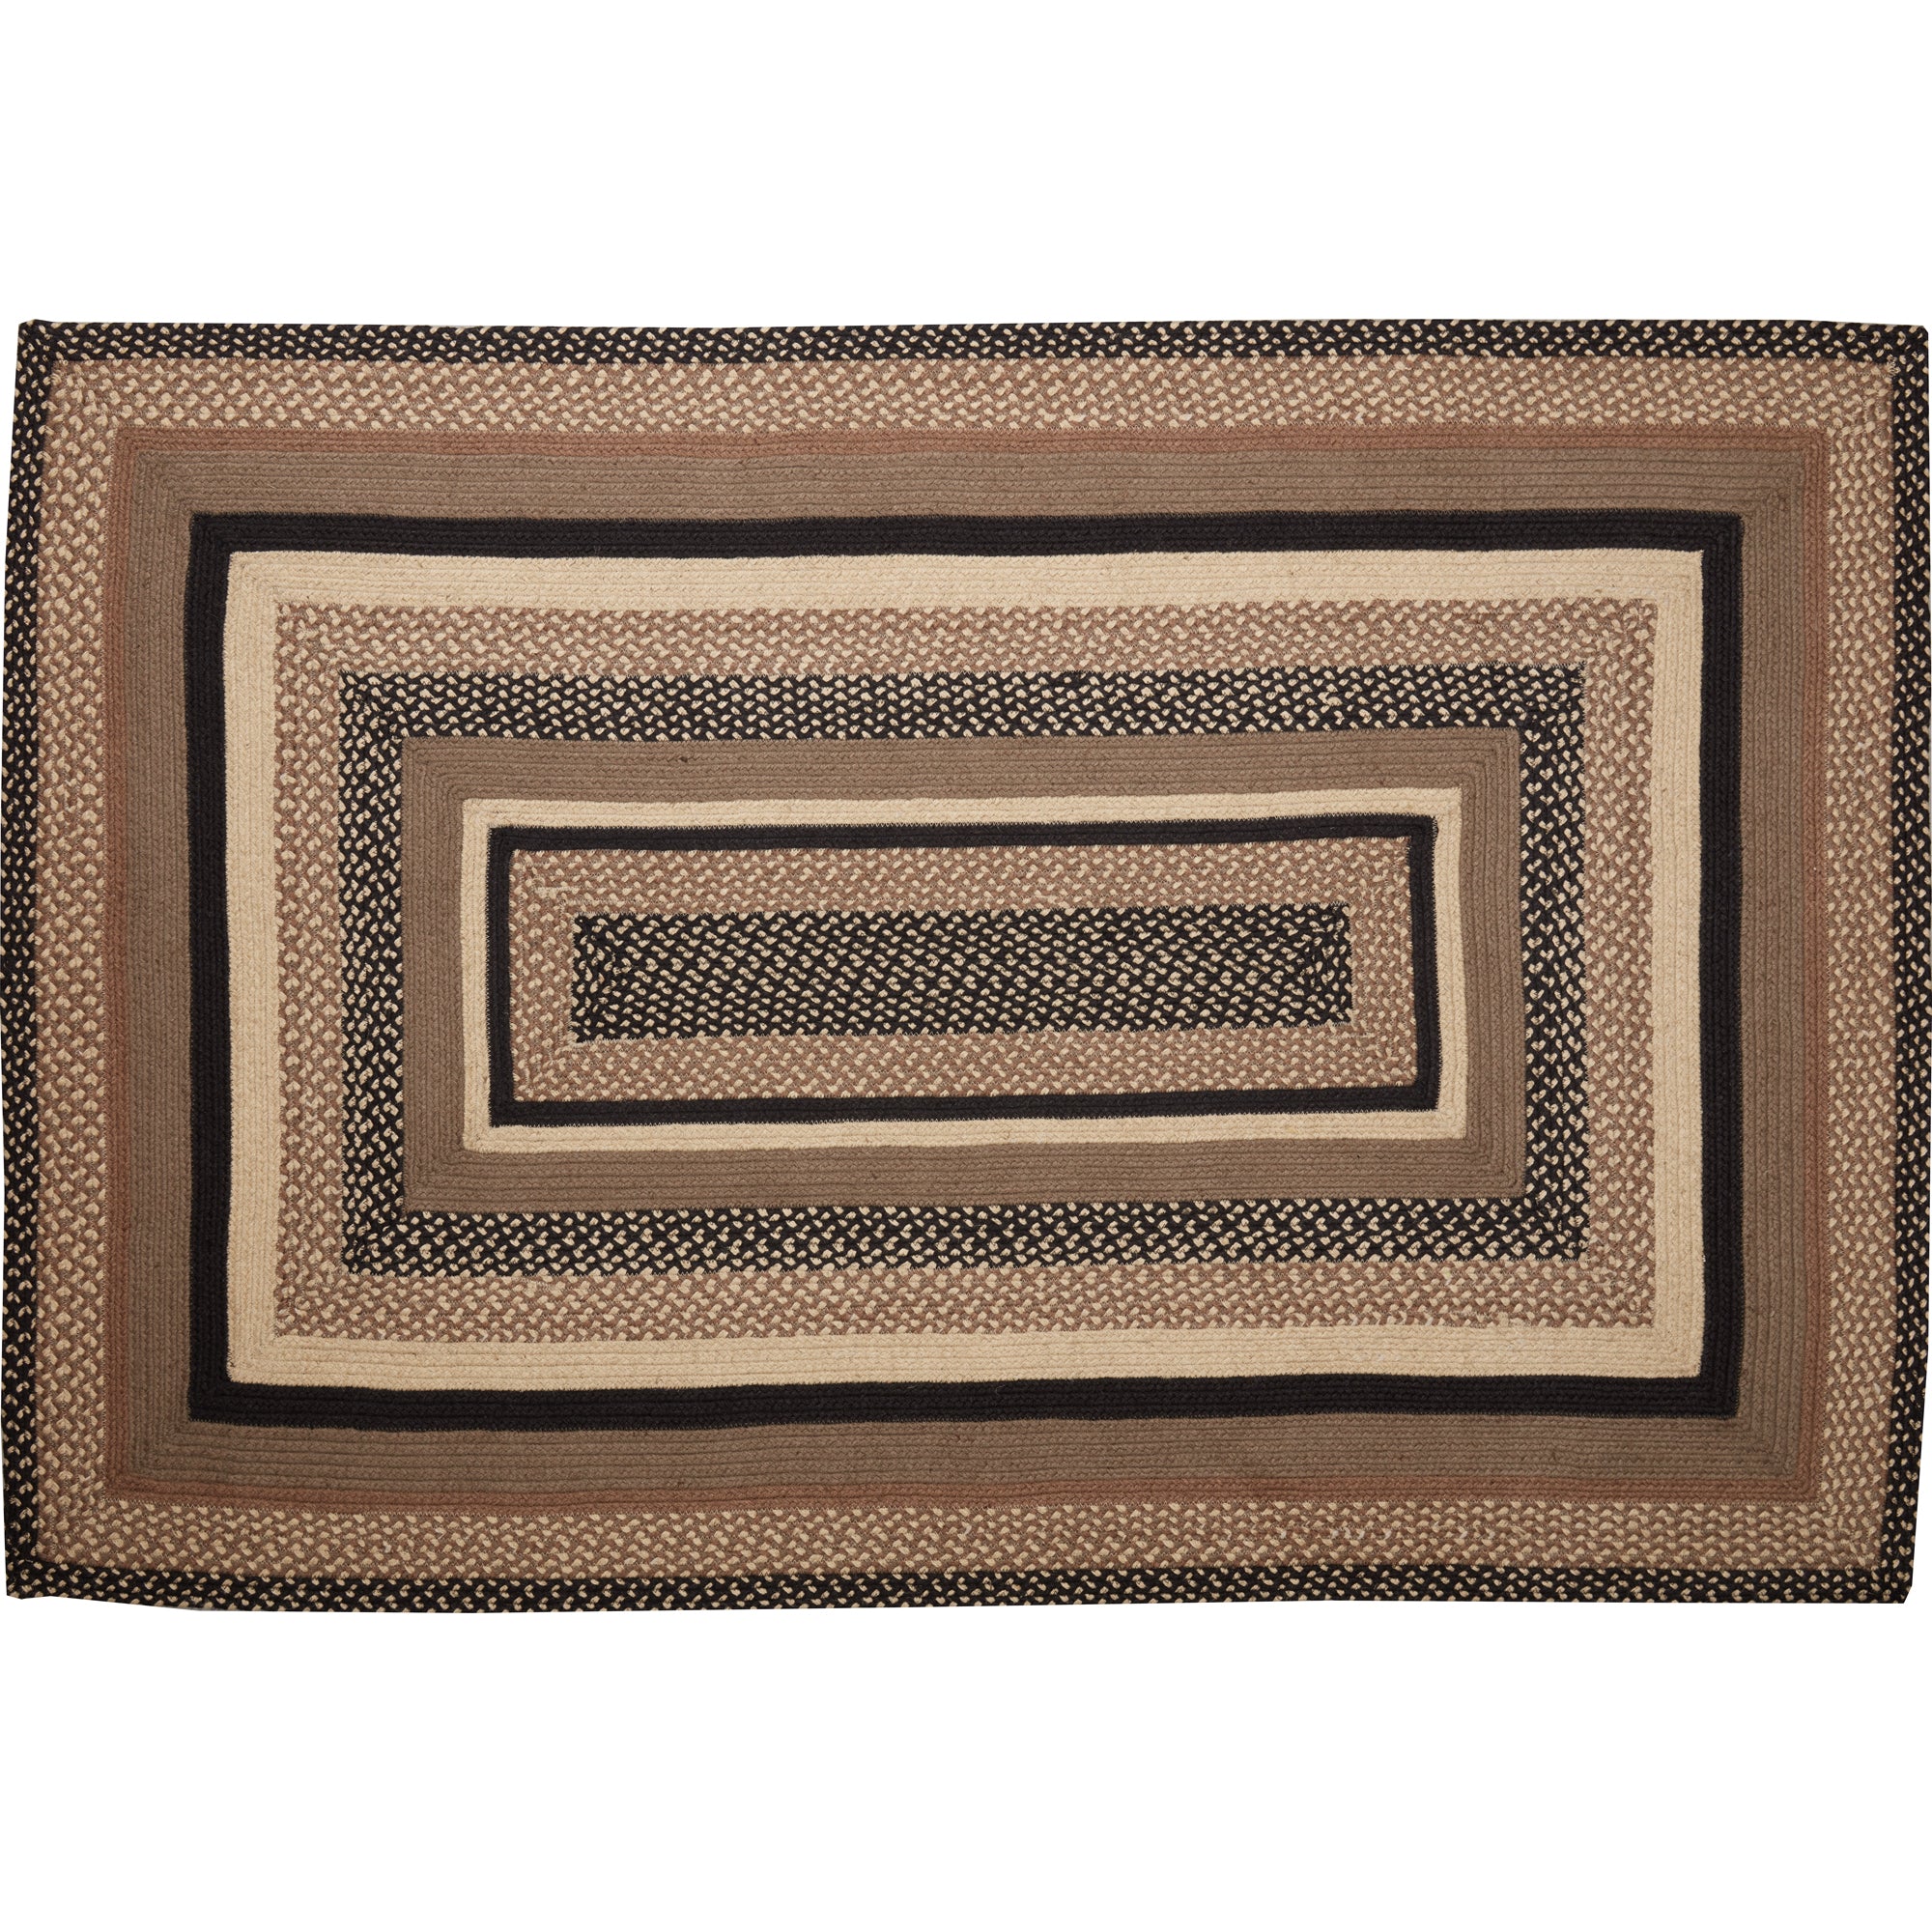 April & Olive Sawyer Mill Charcoal Creme Jute Rug Rect w/ Pad 48x72 By VHC Brands